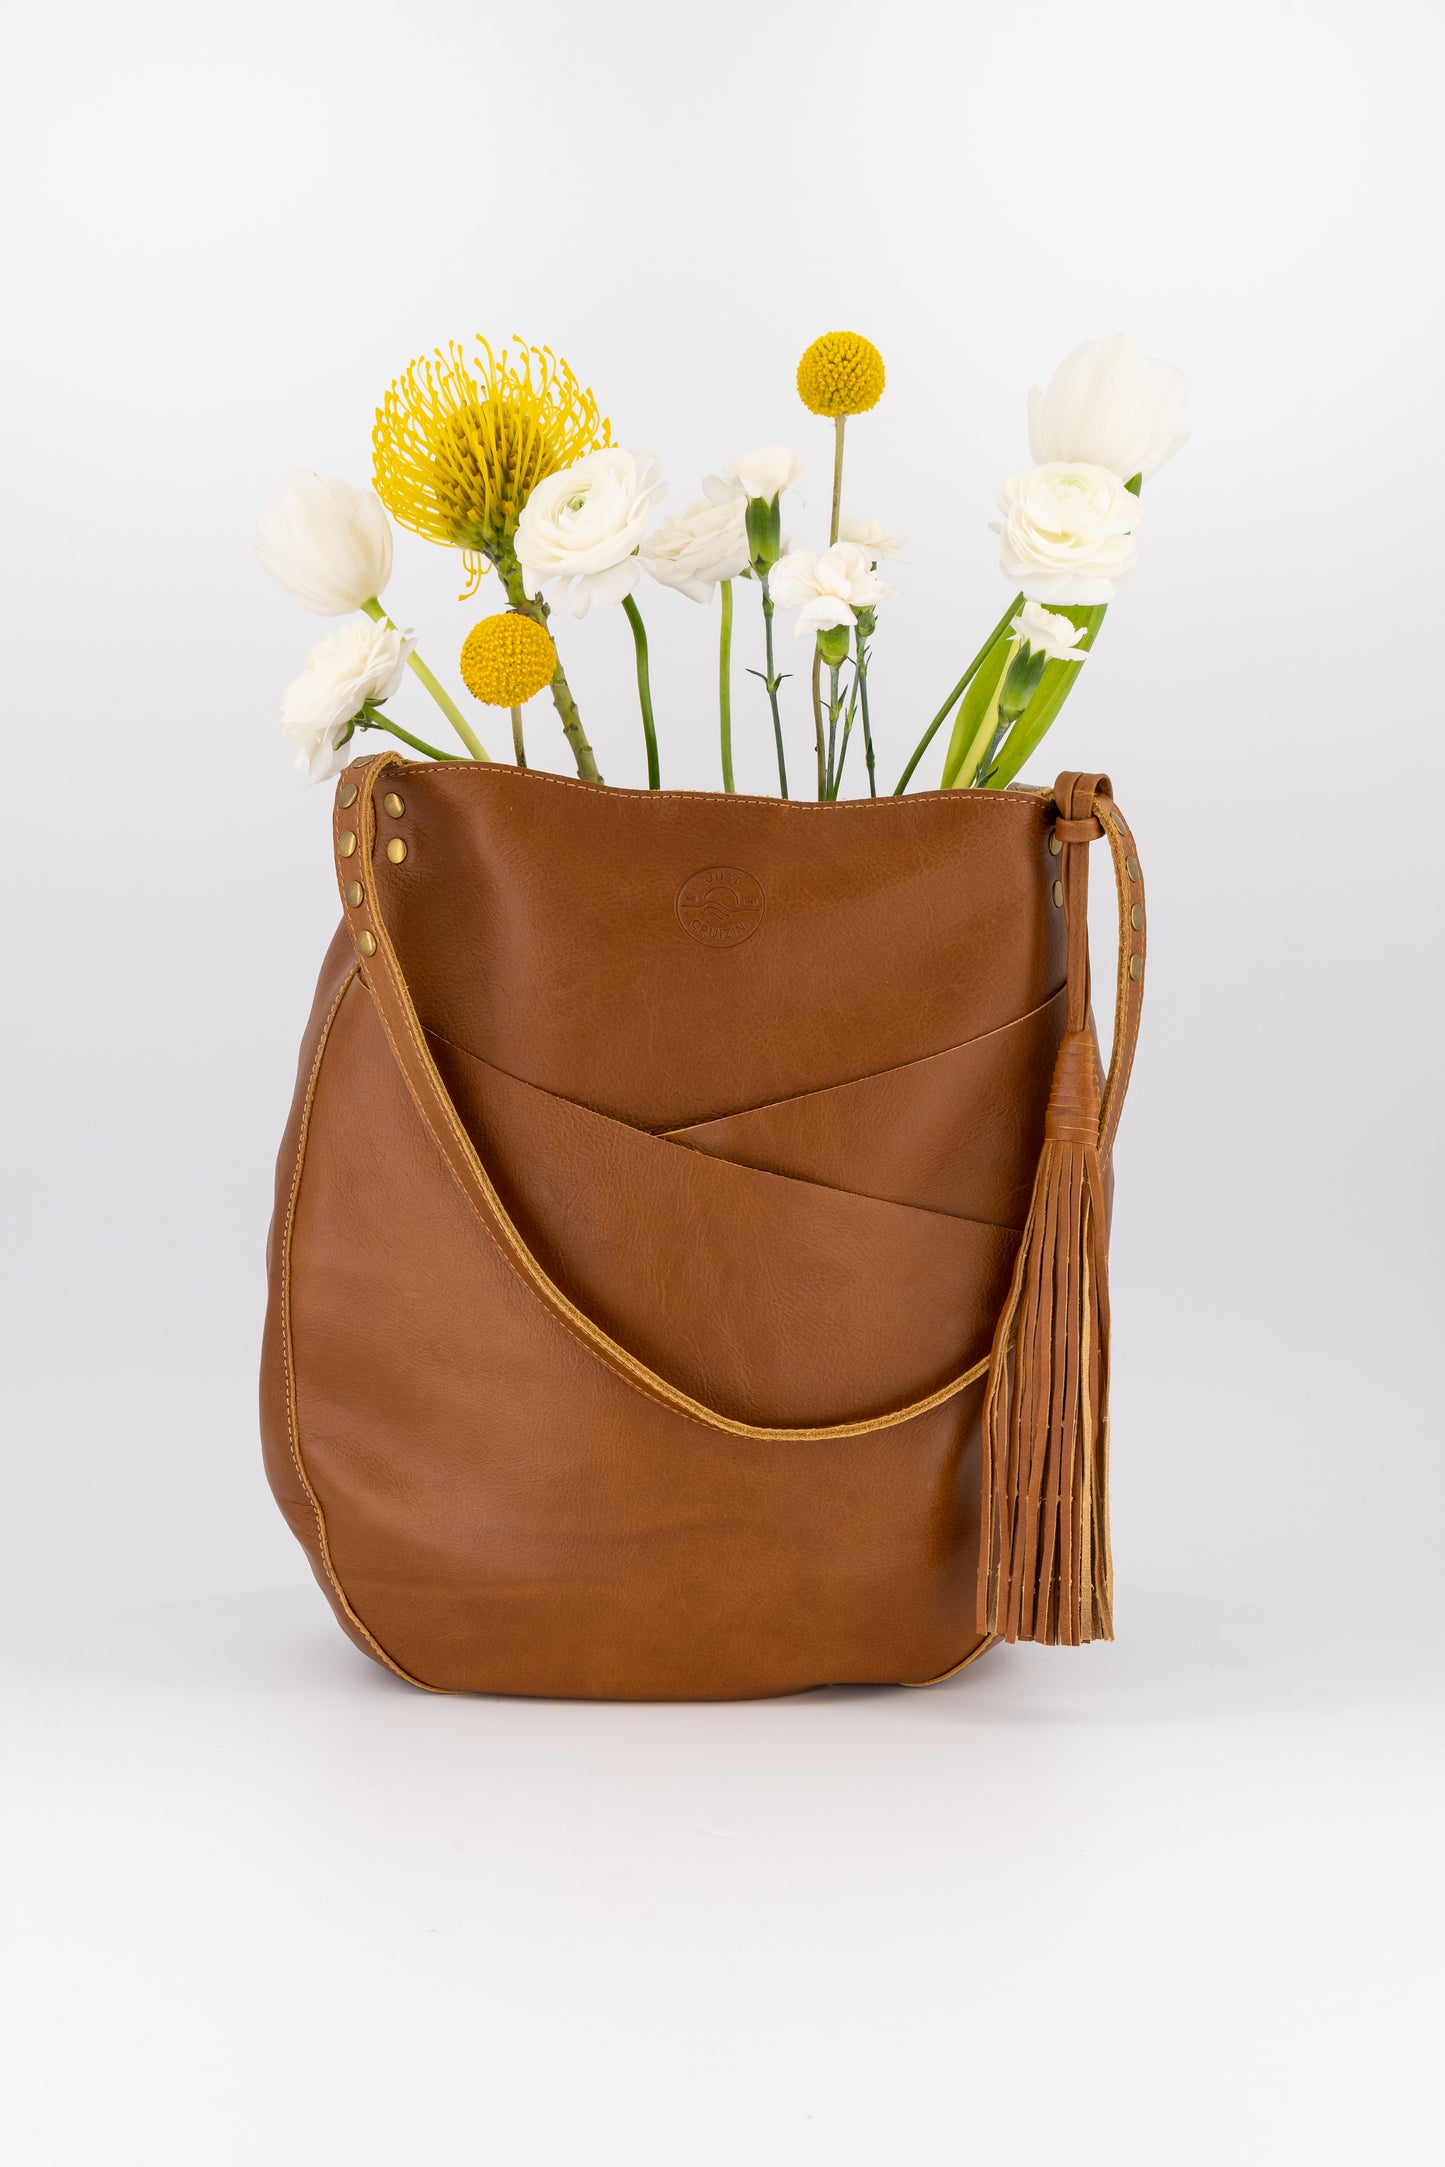 Posey Leather Shopper Bag